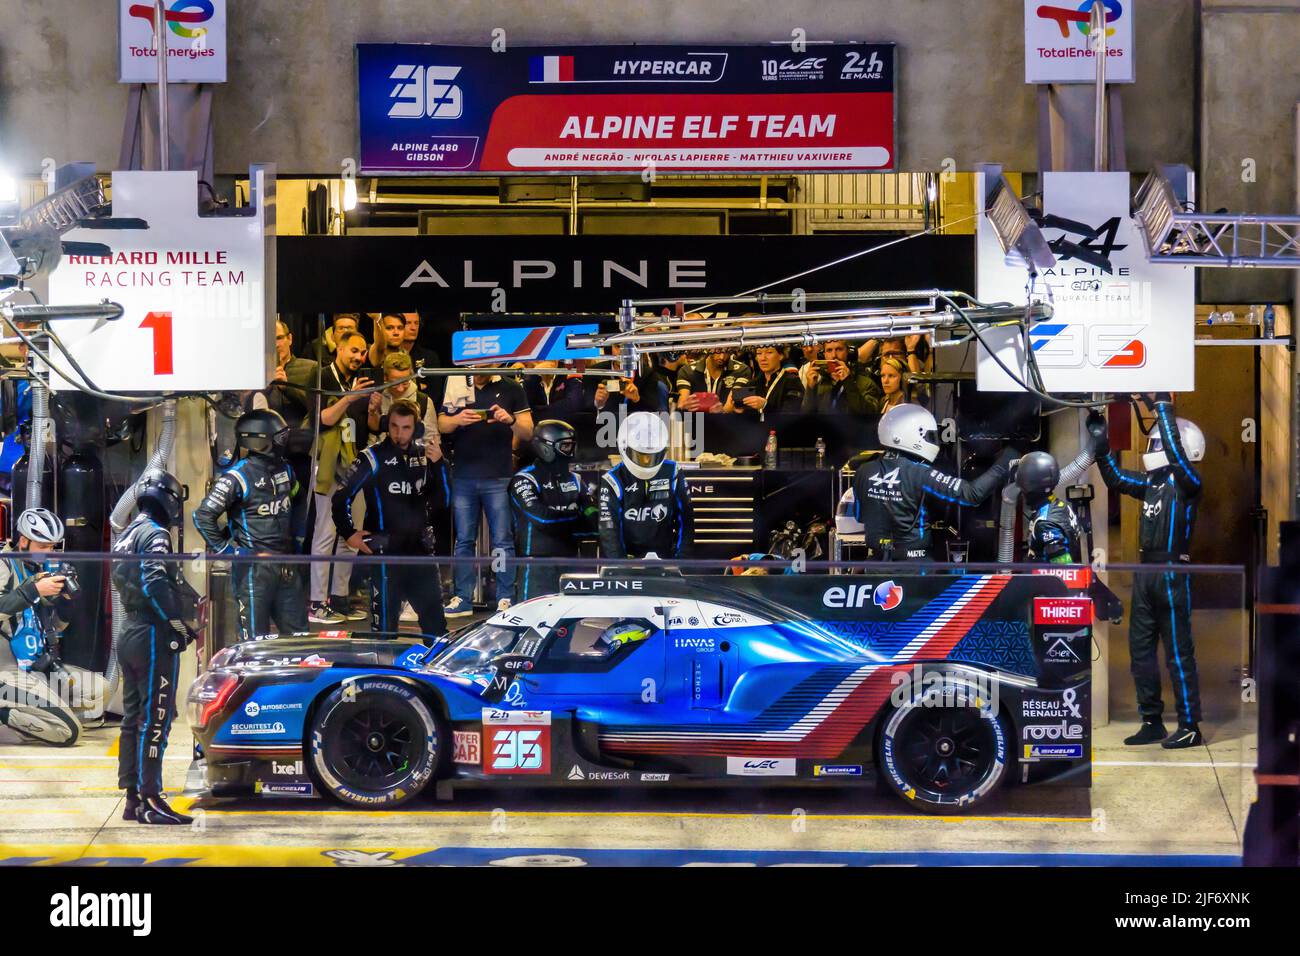 The Alpine A480 Hypercar race car number 36 performs a pit stop at night during the 24 hours of Le Mans. Stock Photo